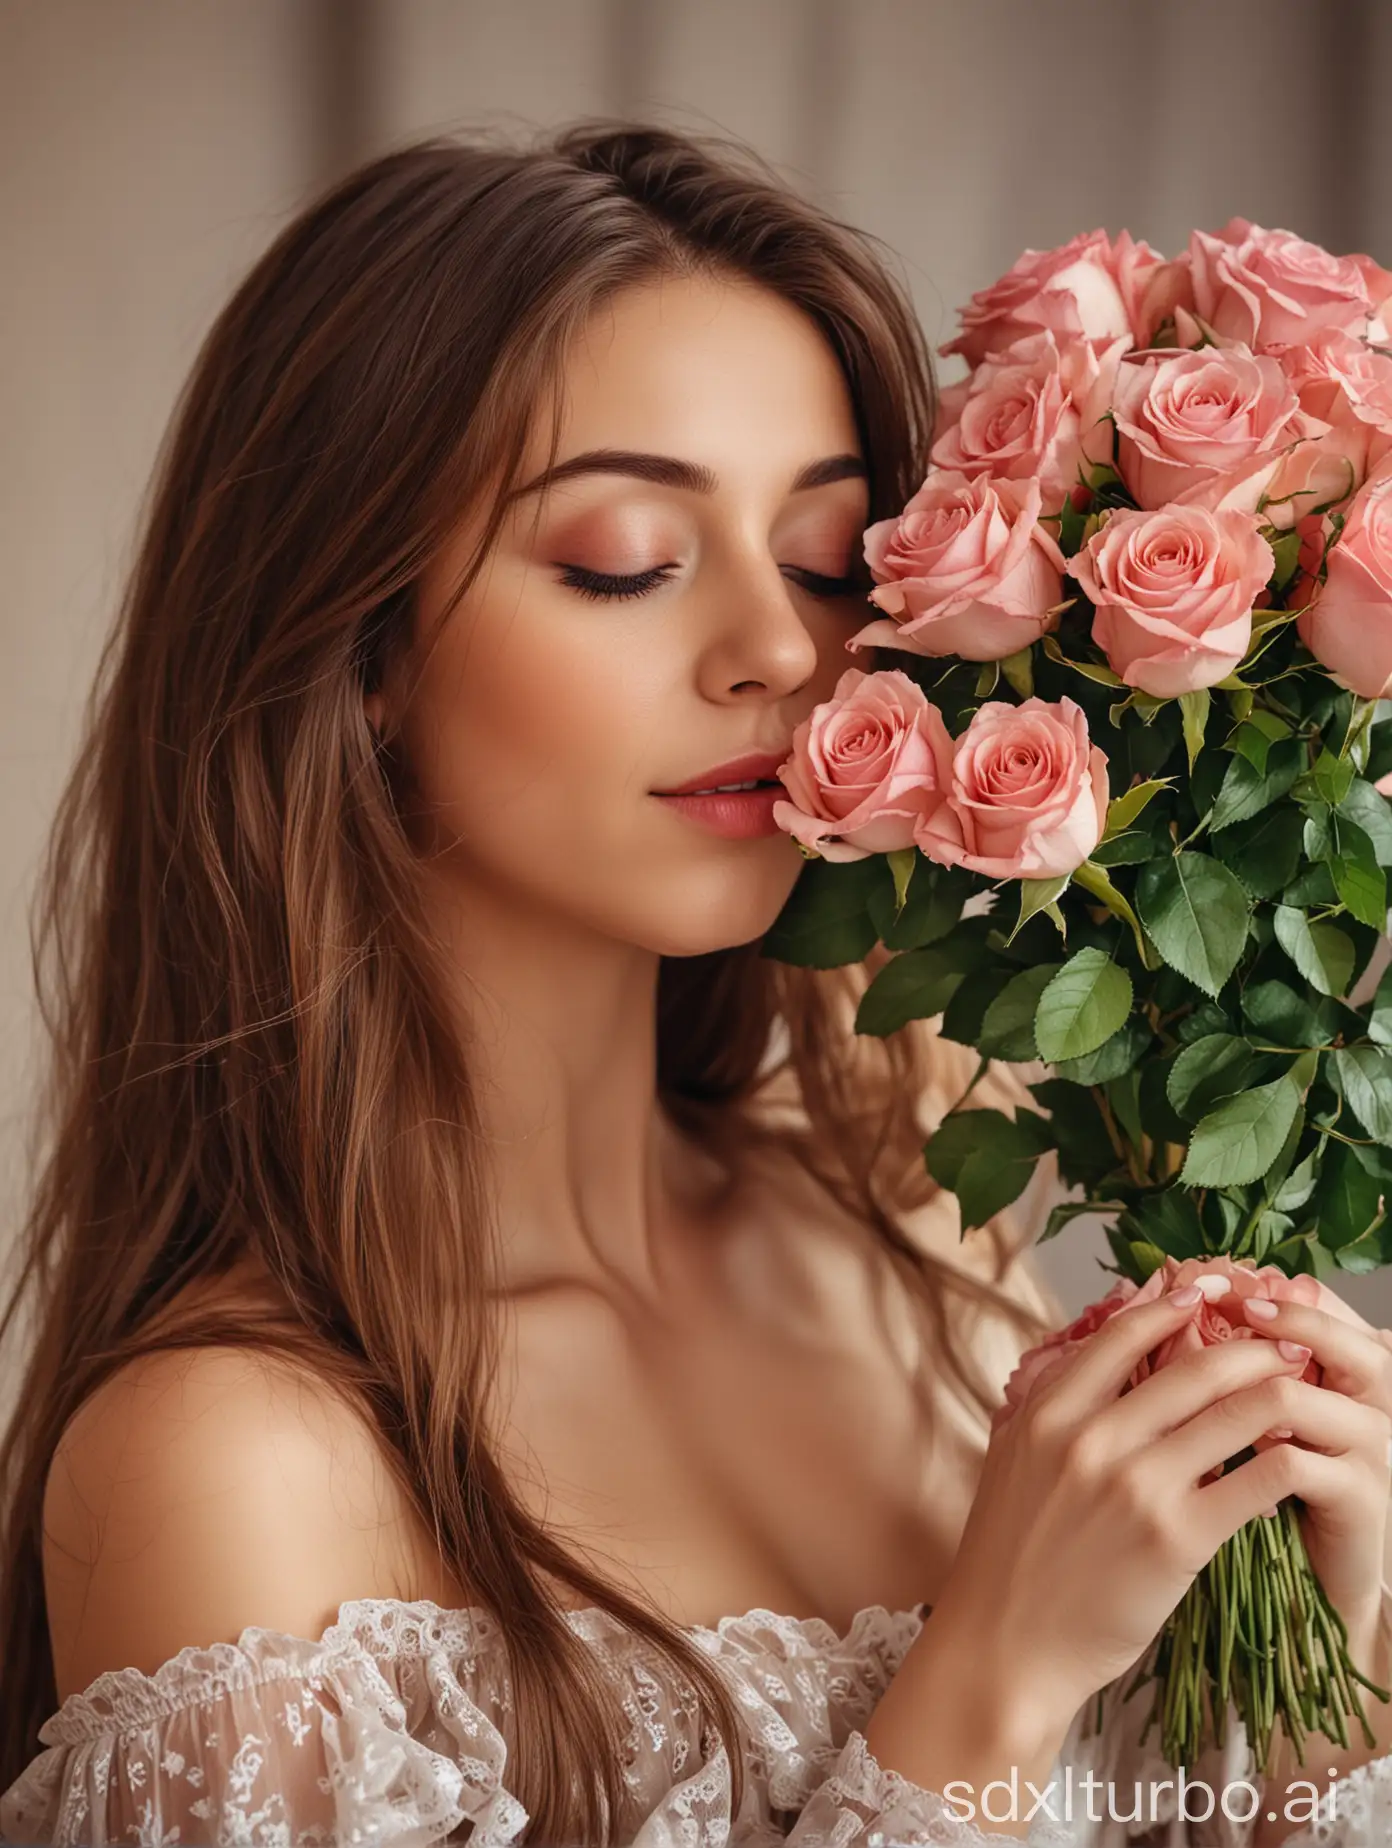 woman, long brown hair, small breast, realistic, photography, holding a bouquet of roses, smelling a bouquet of roses, background bokeh, close up